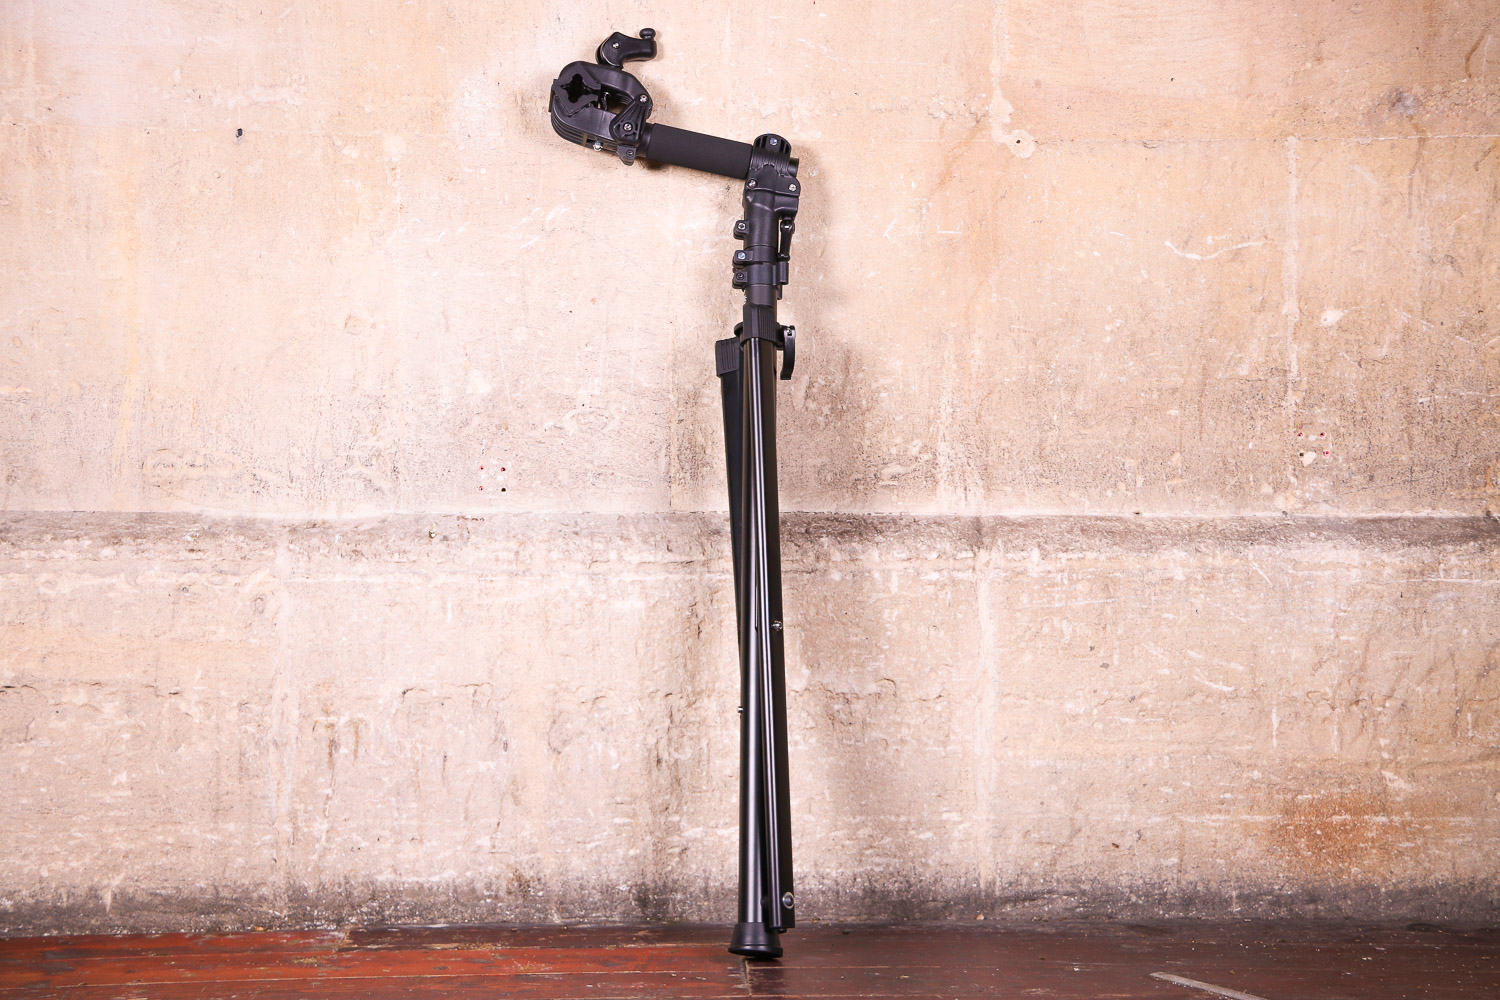 fwe compact folding workstand